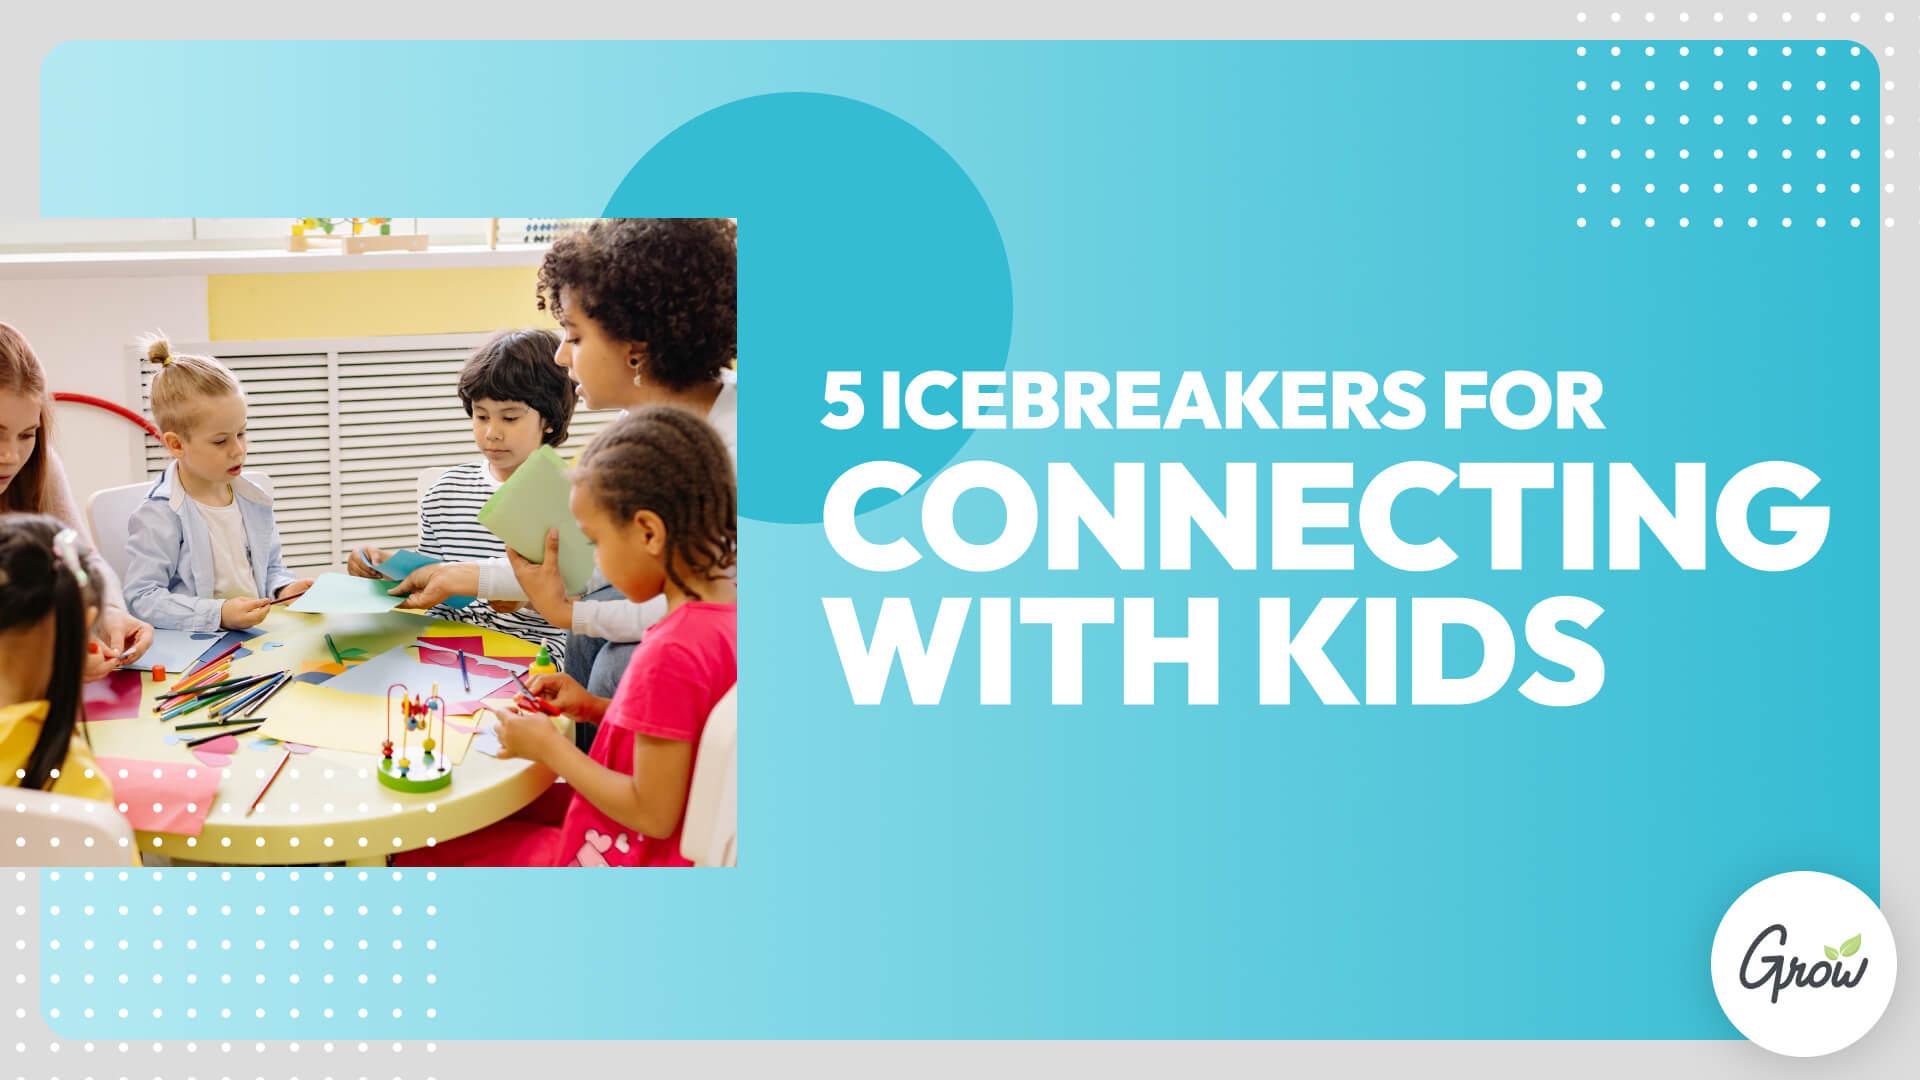 5 Icebreakers for Connecting With Kids